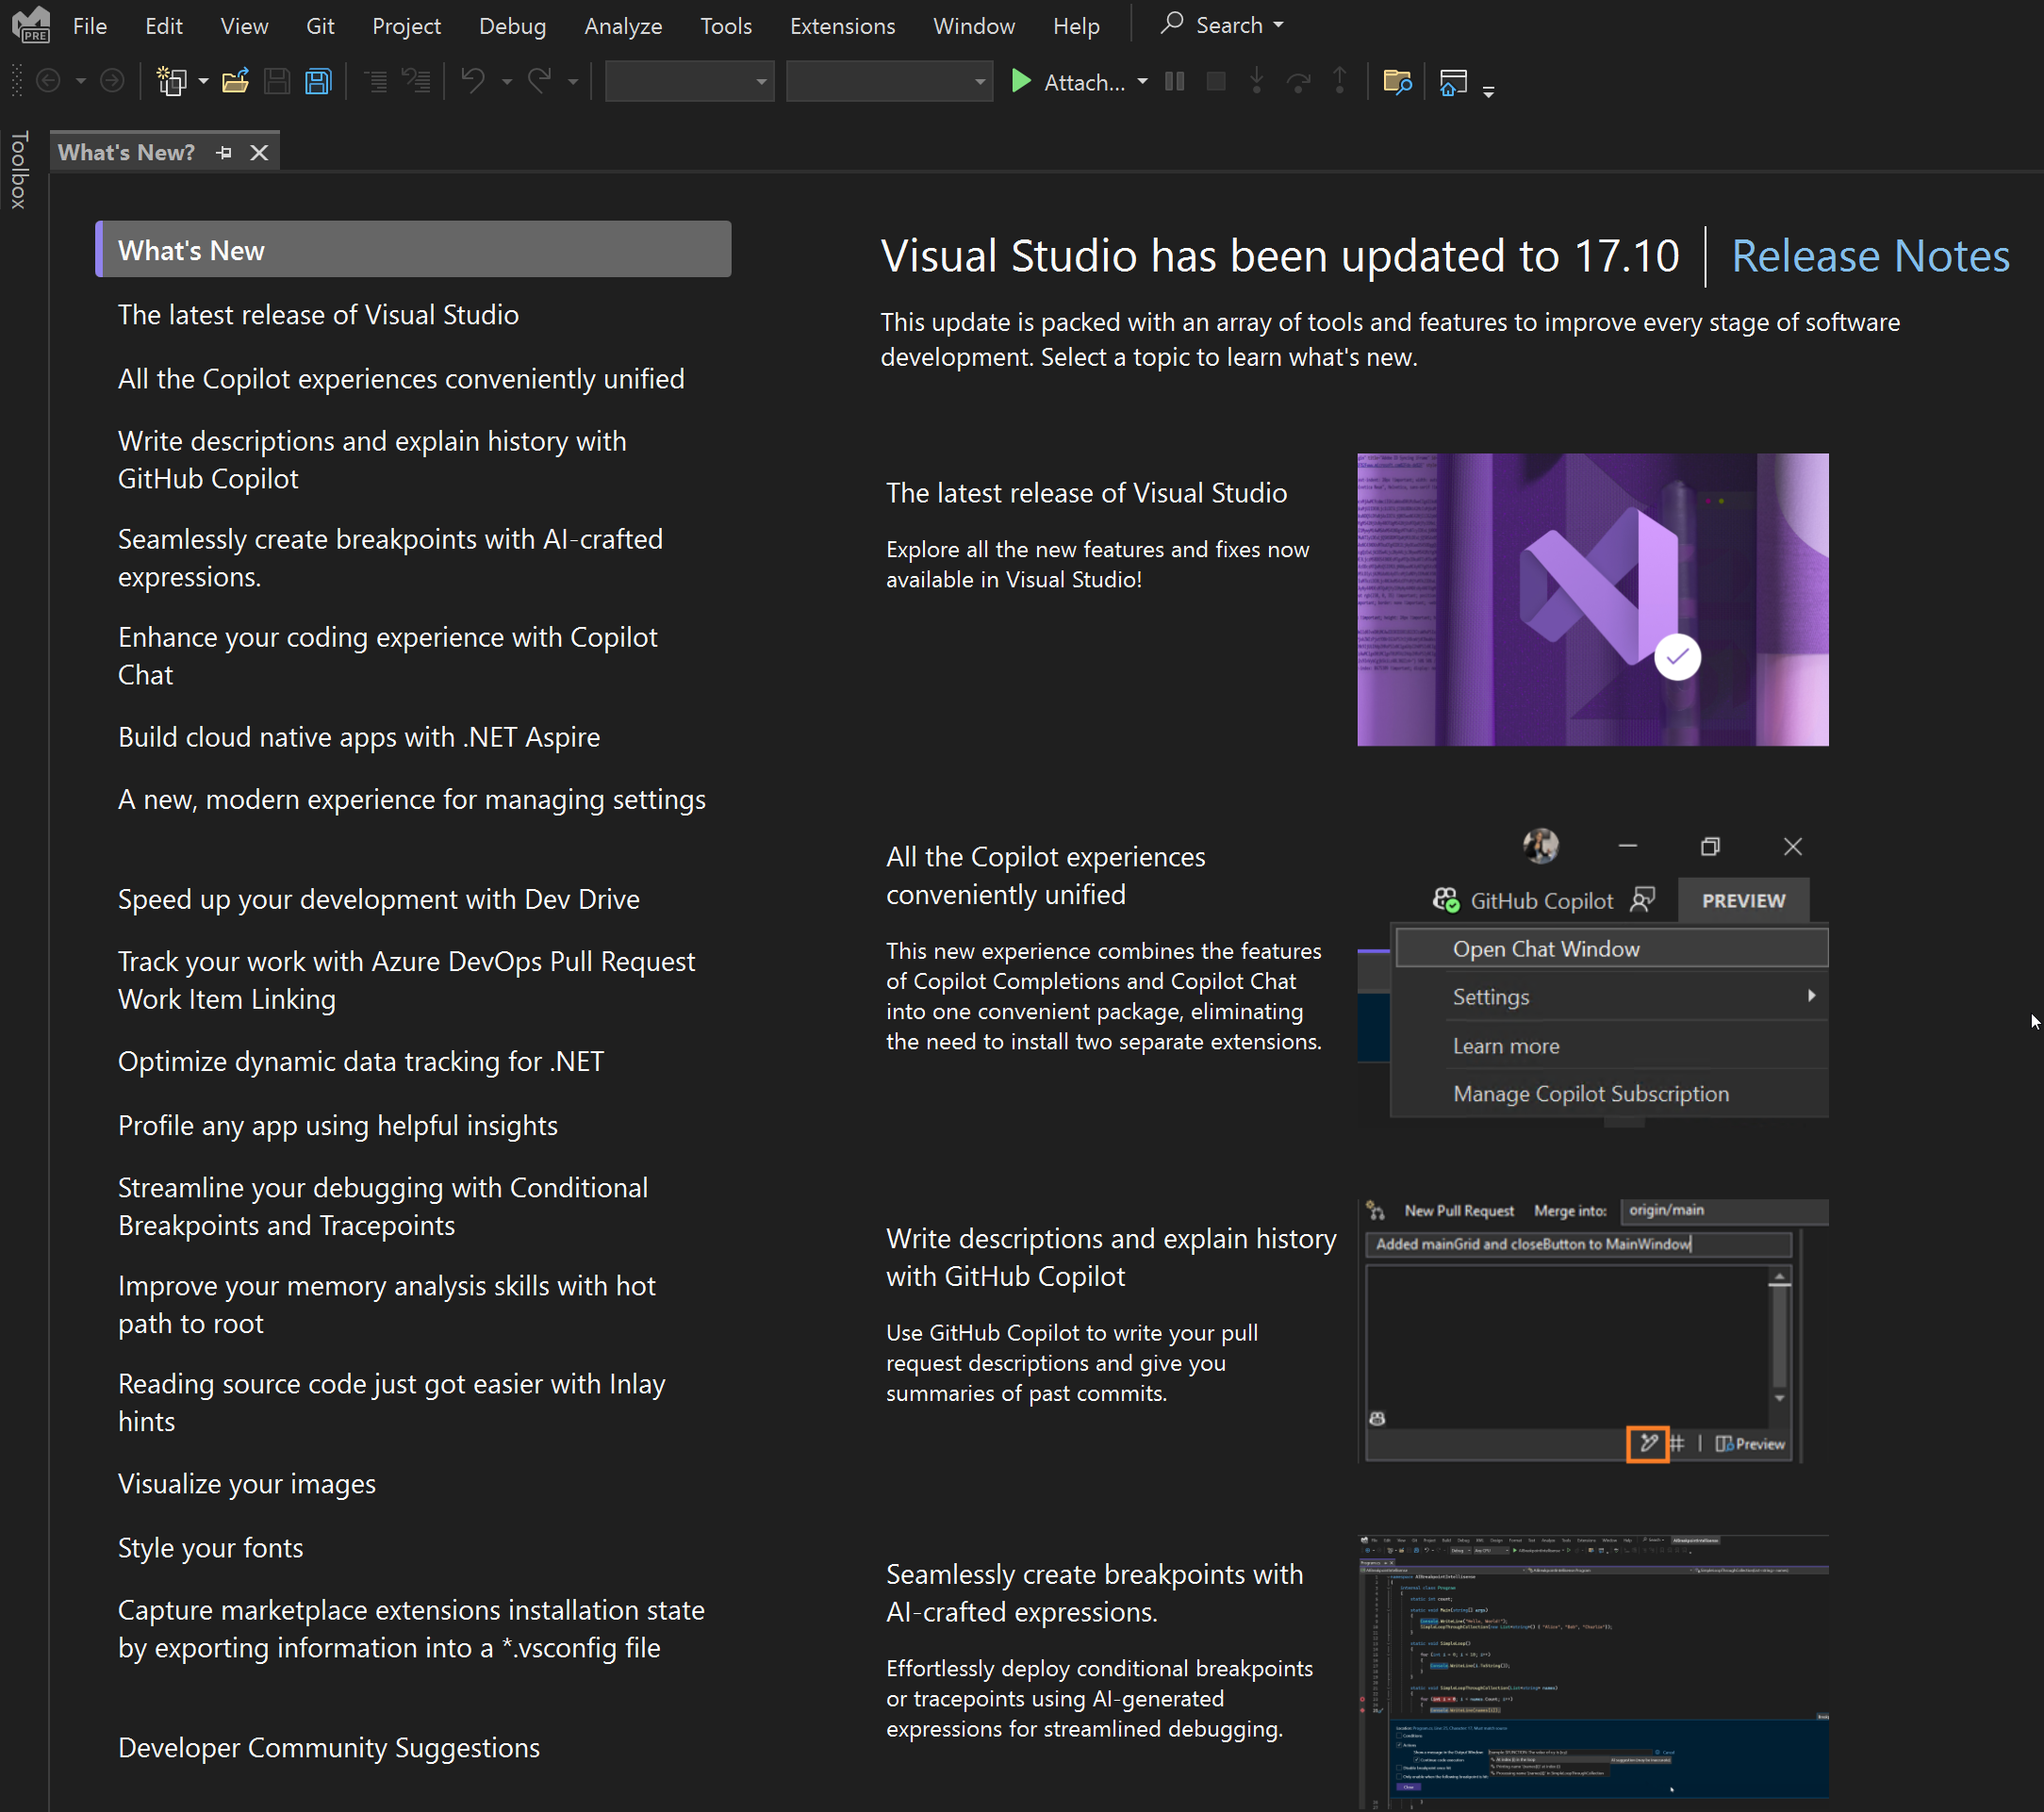 What's new in Visual Studio 2022